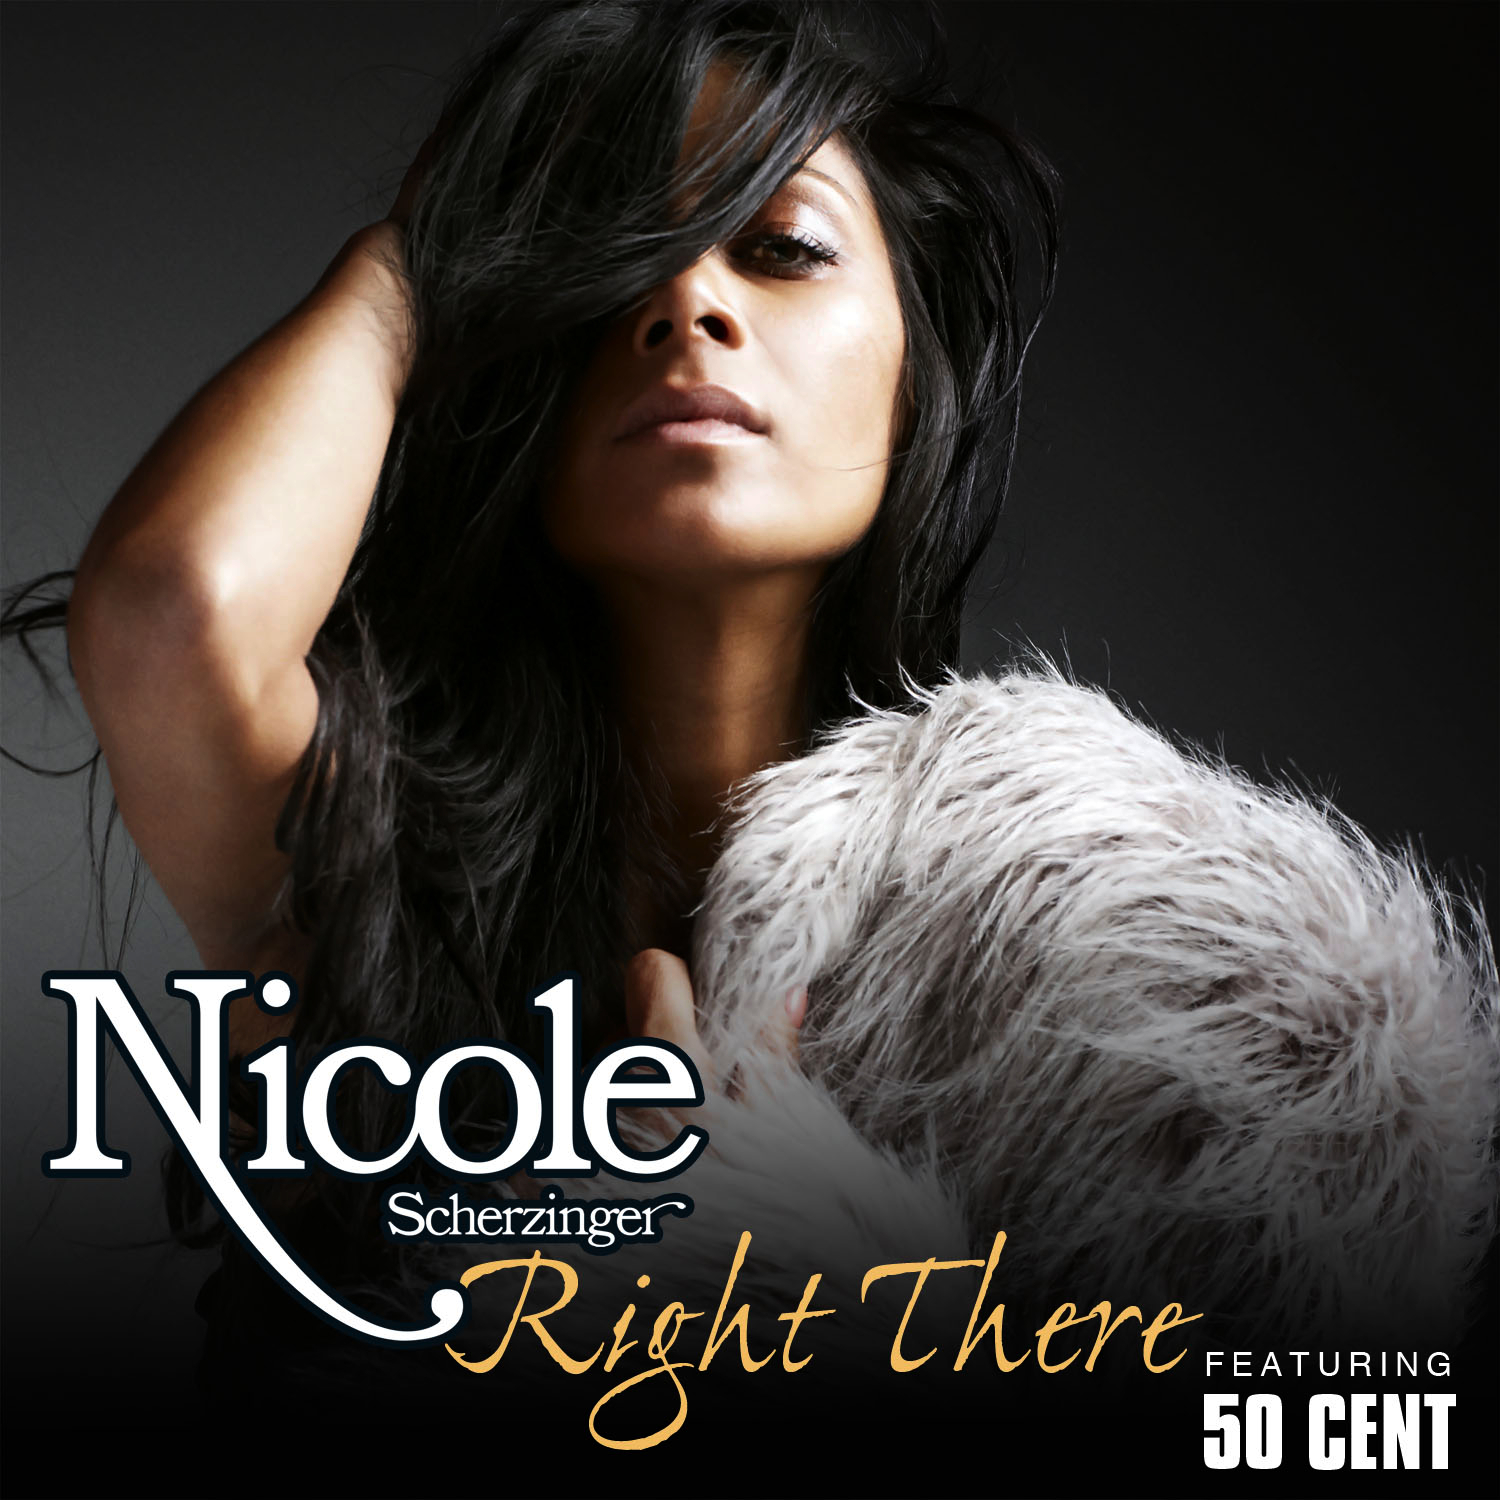 nicole scherzinger ft 50 cent right there mp3 free download